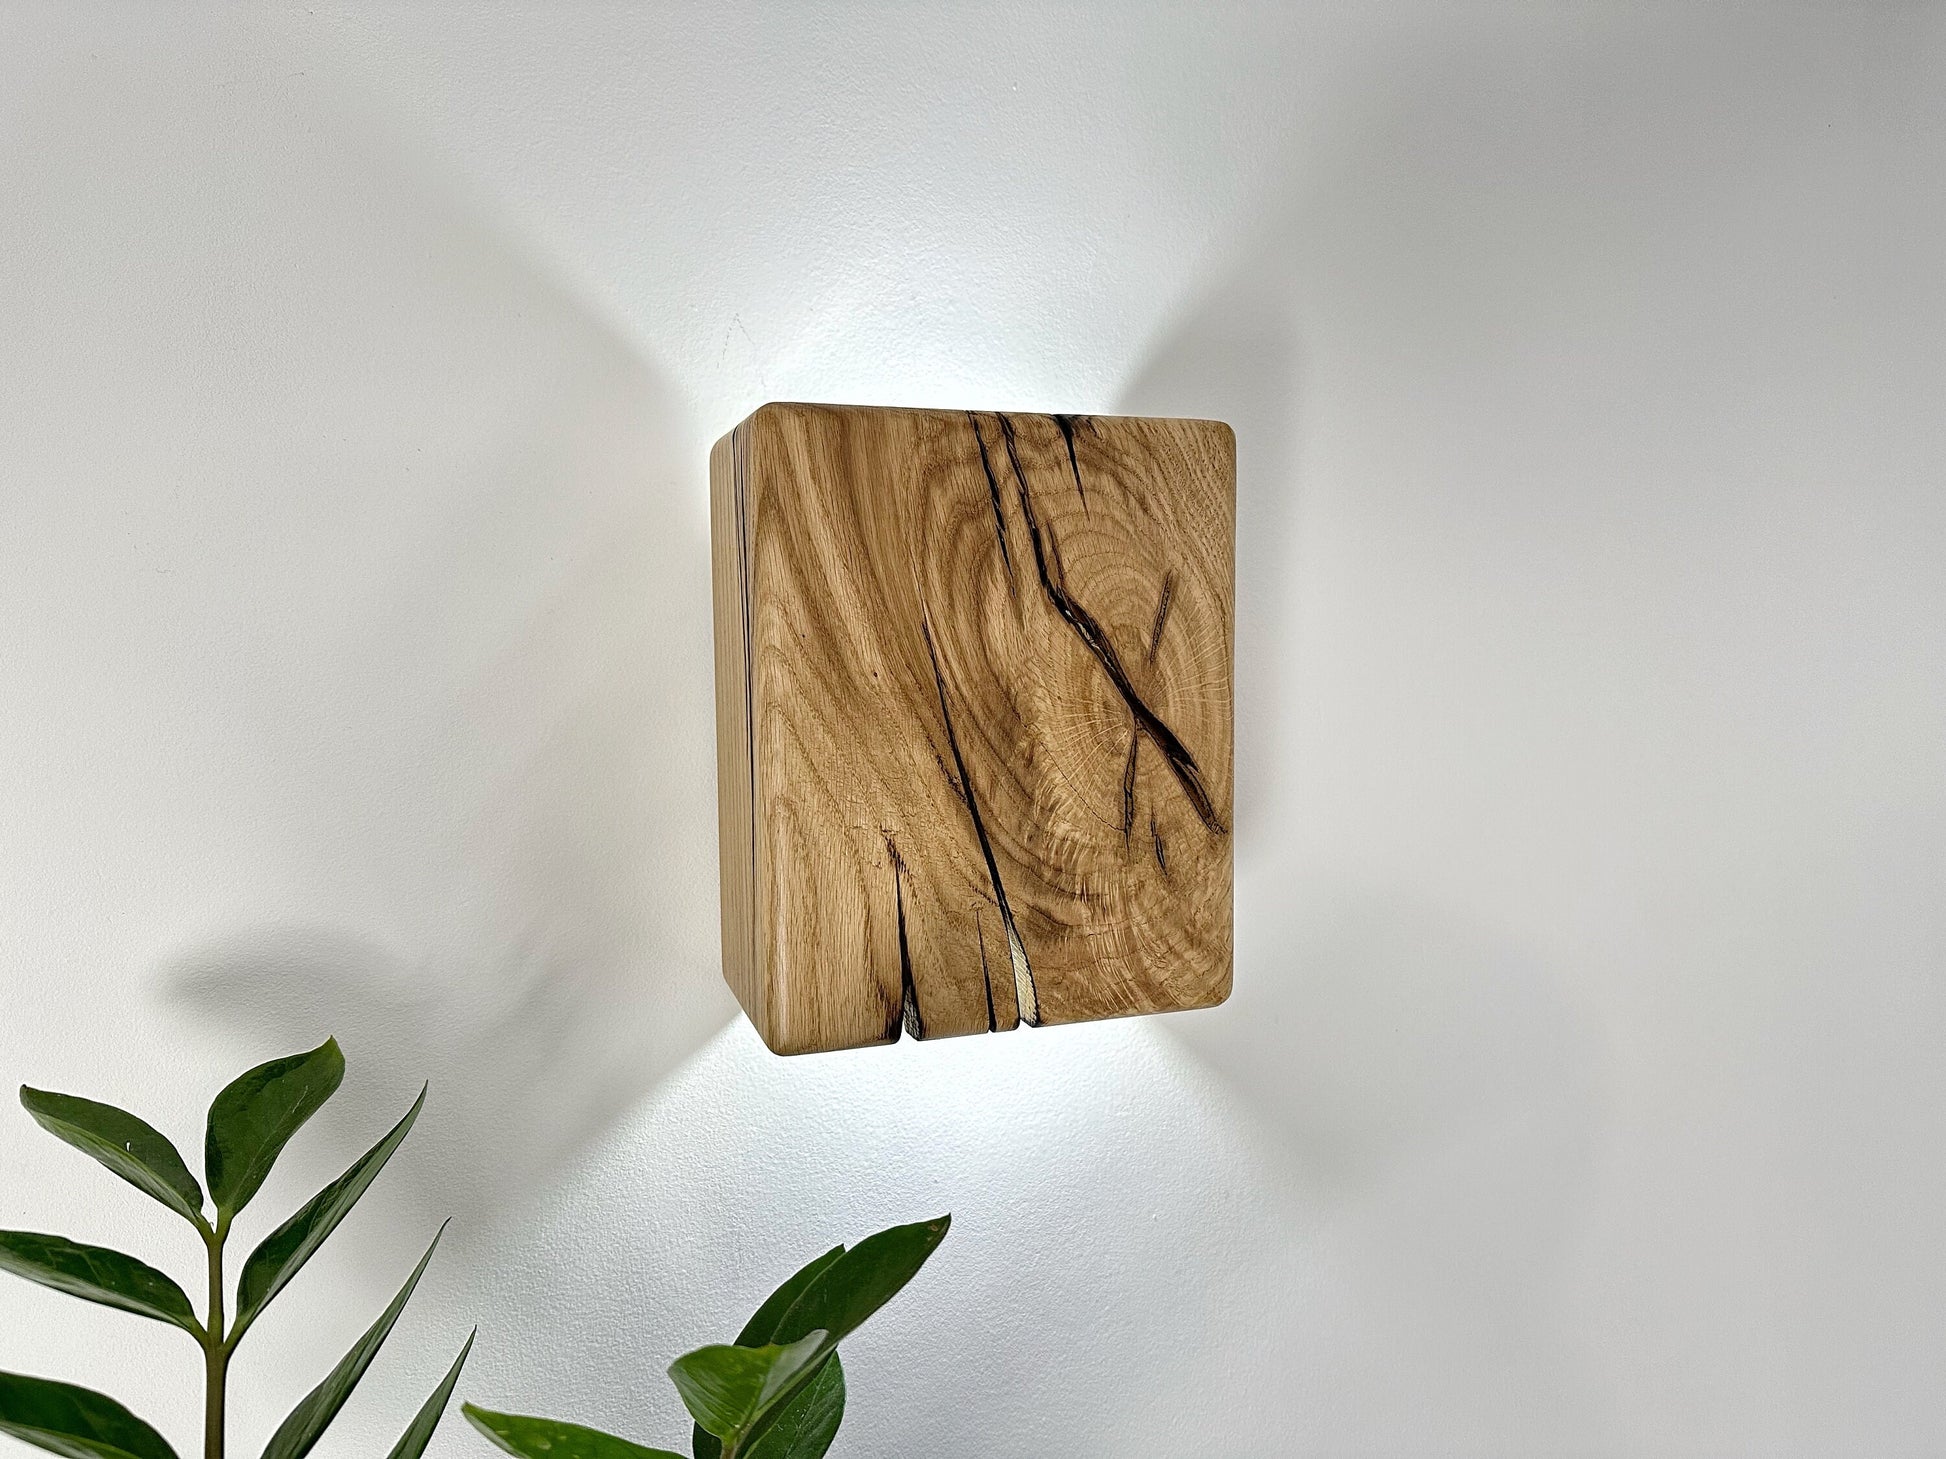 Handmade wood plug in wall lamp sconce or with switch fixture, custom size wall bedside lamp, sconce lighting, lampshades, wood wall lights